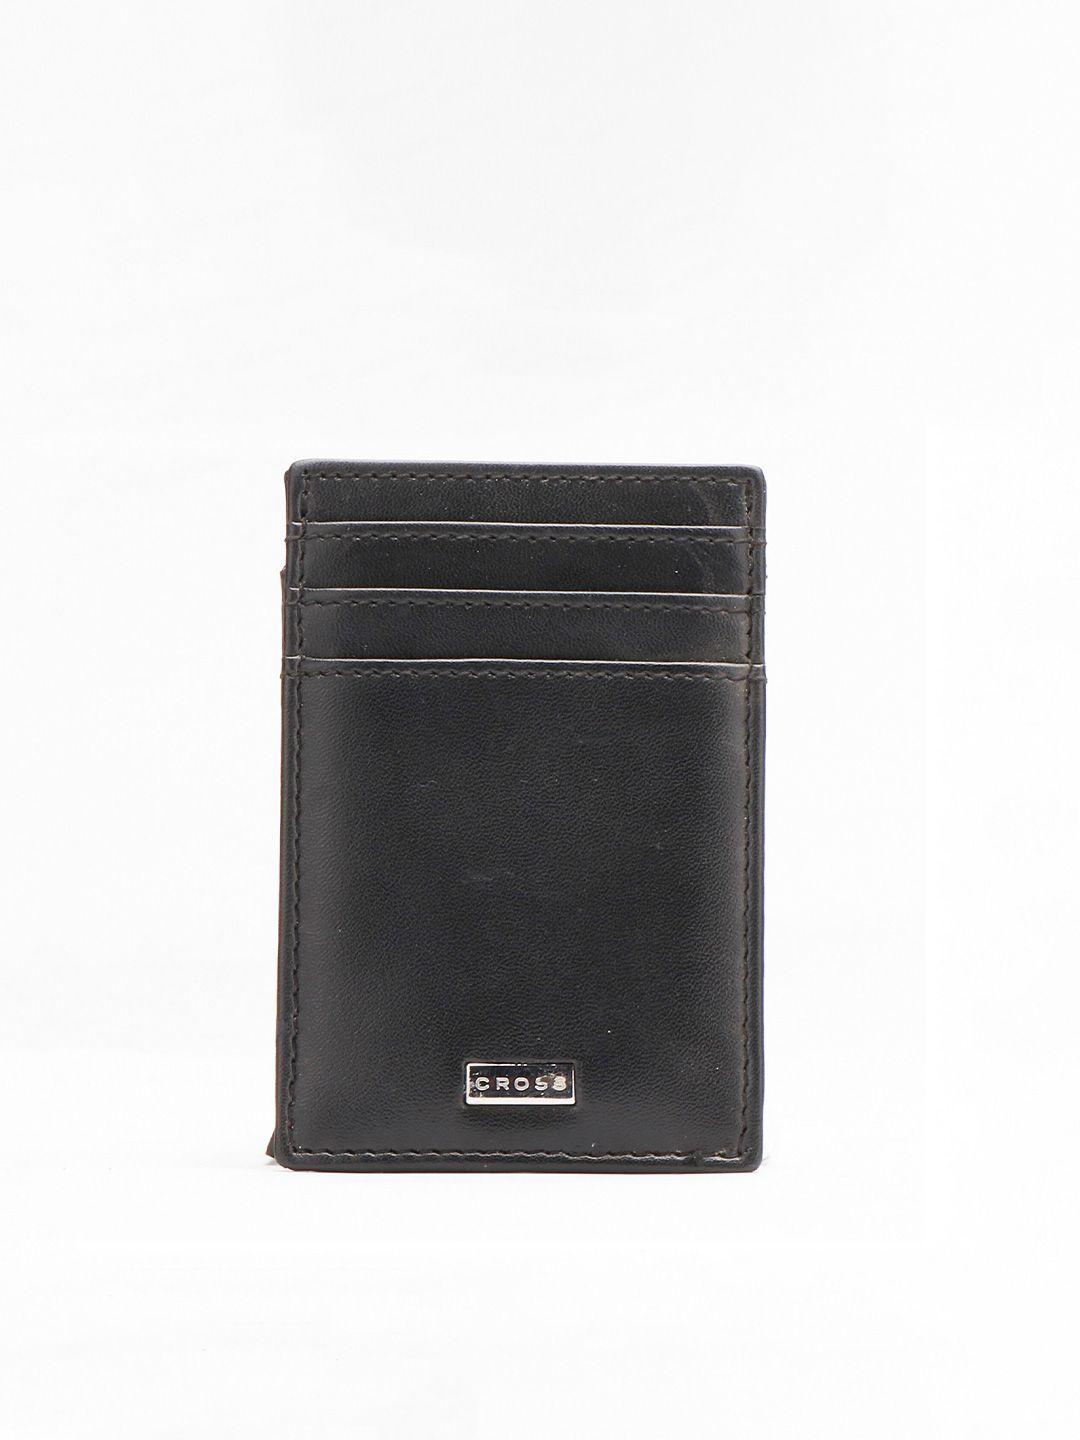 cross unisex black & silver-toned leather card holder